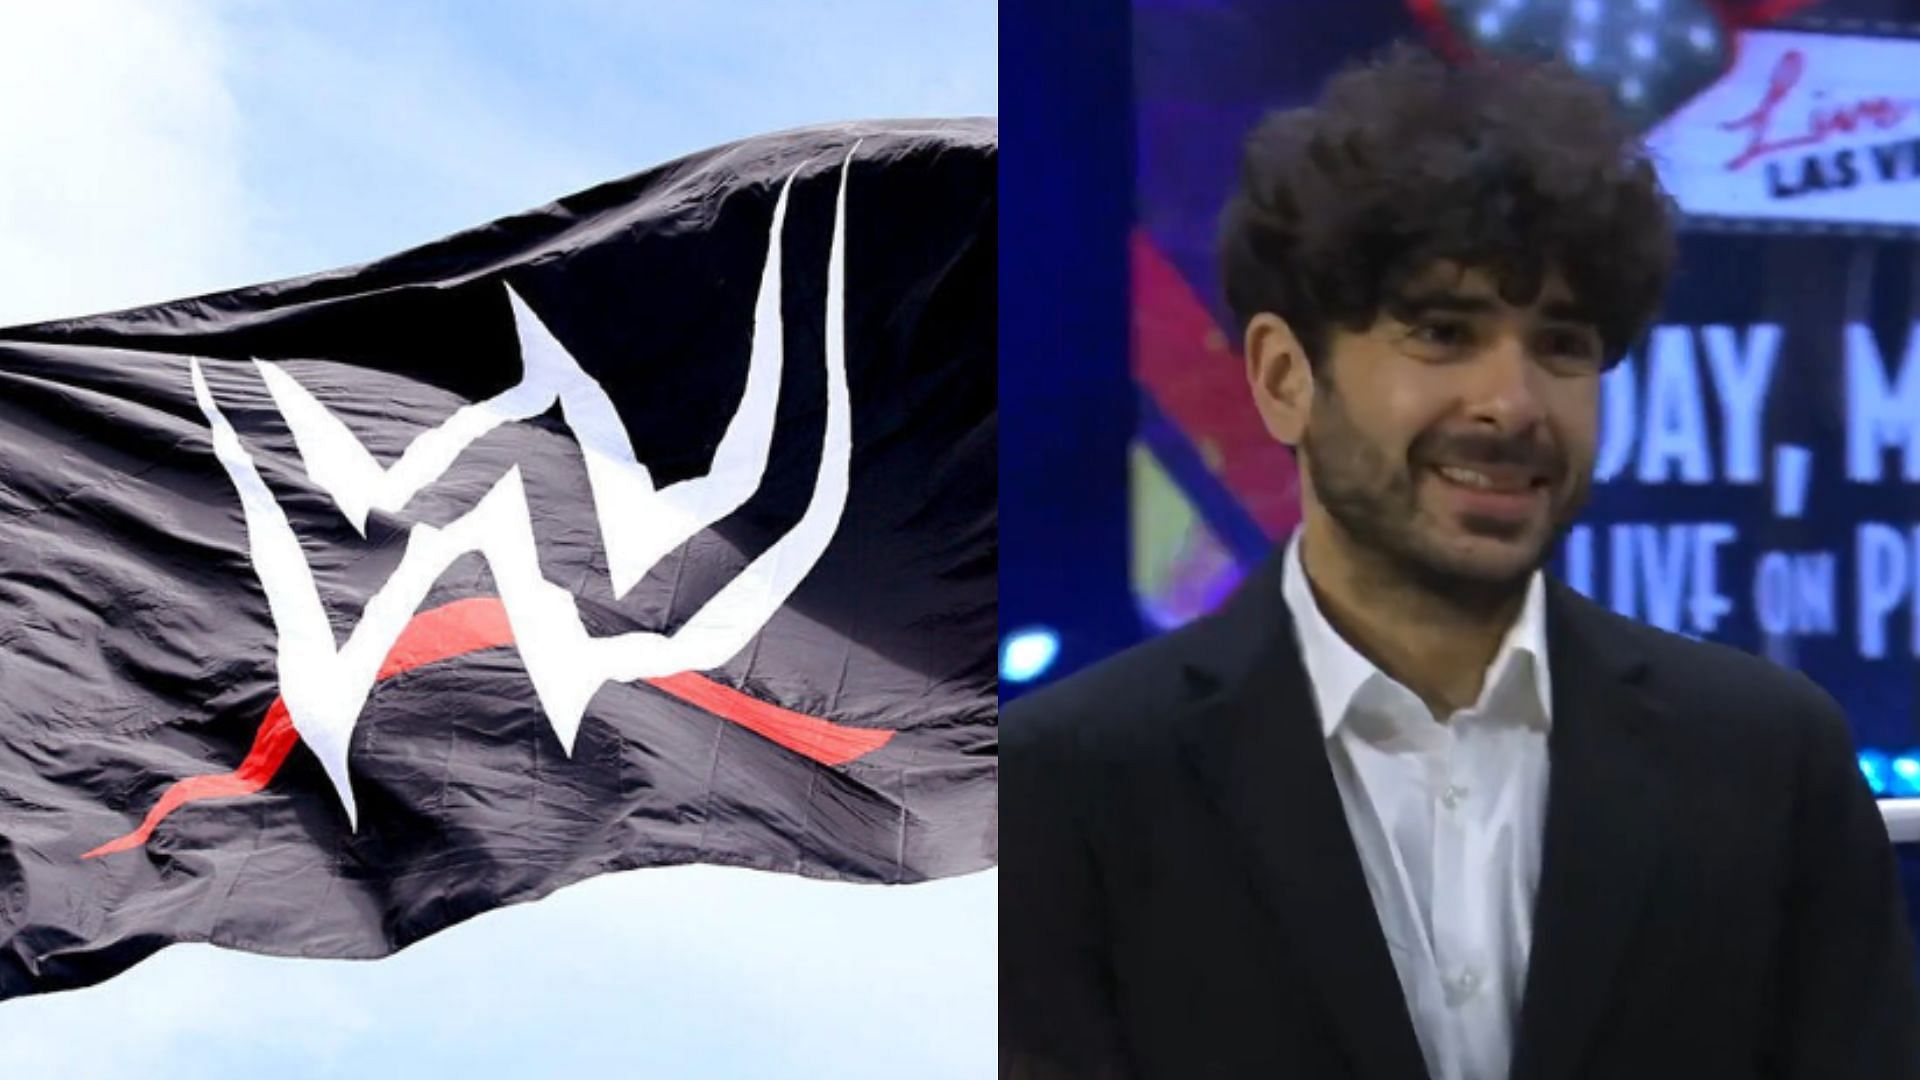 Tony Khan is the owner and CEO of AEW [Image Credits: AEW